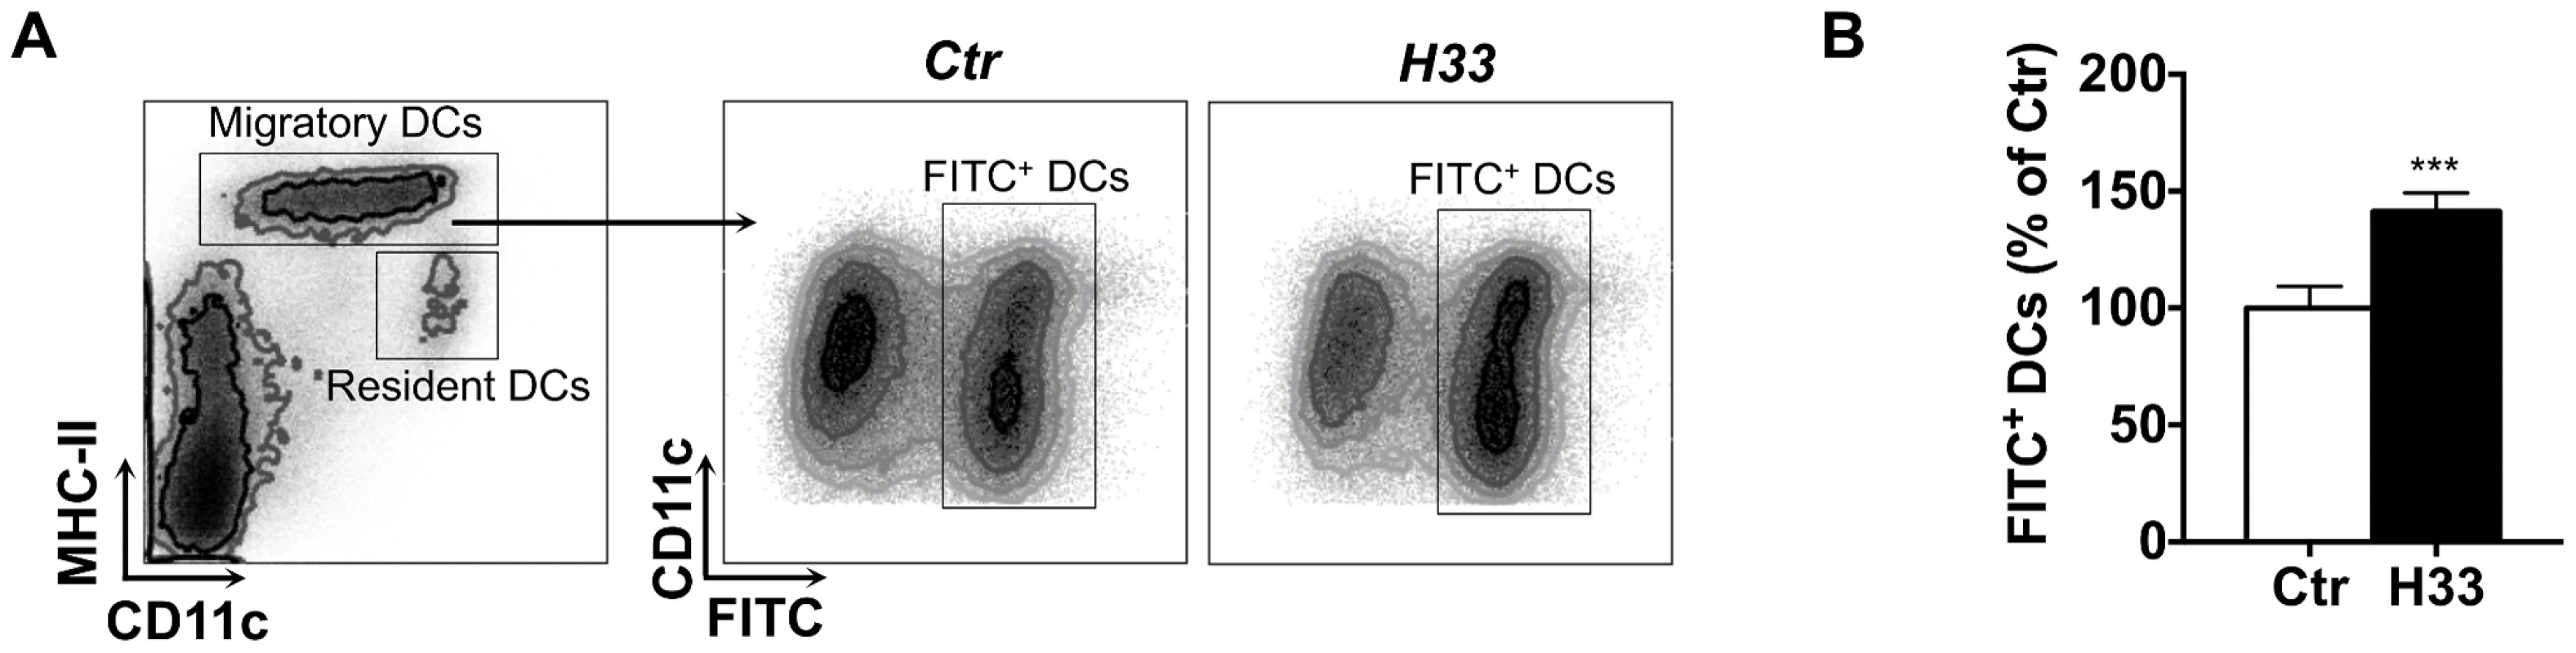 Blocking JAM-C increases the number of DCs migrating to the draining lymph node.